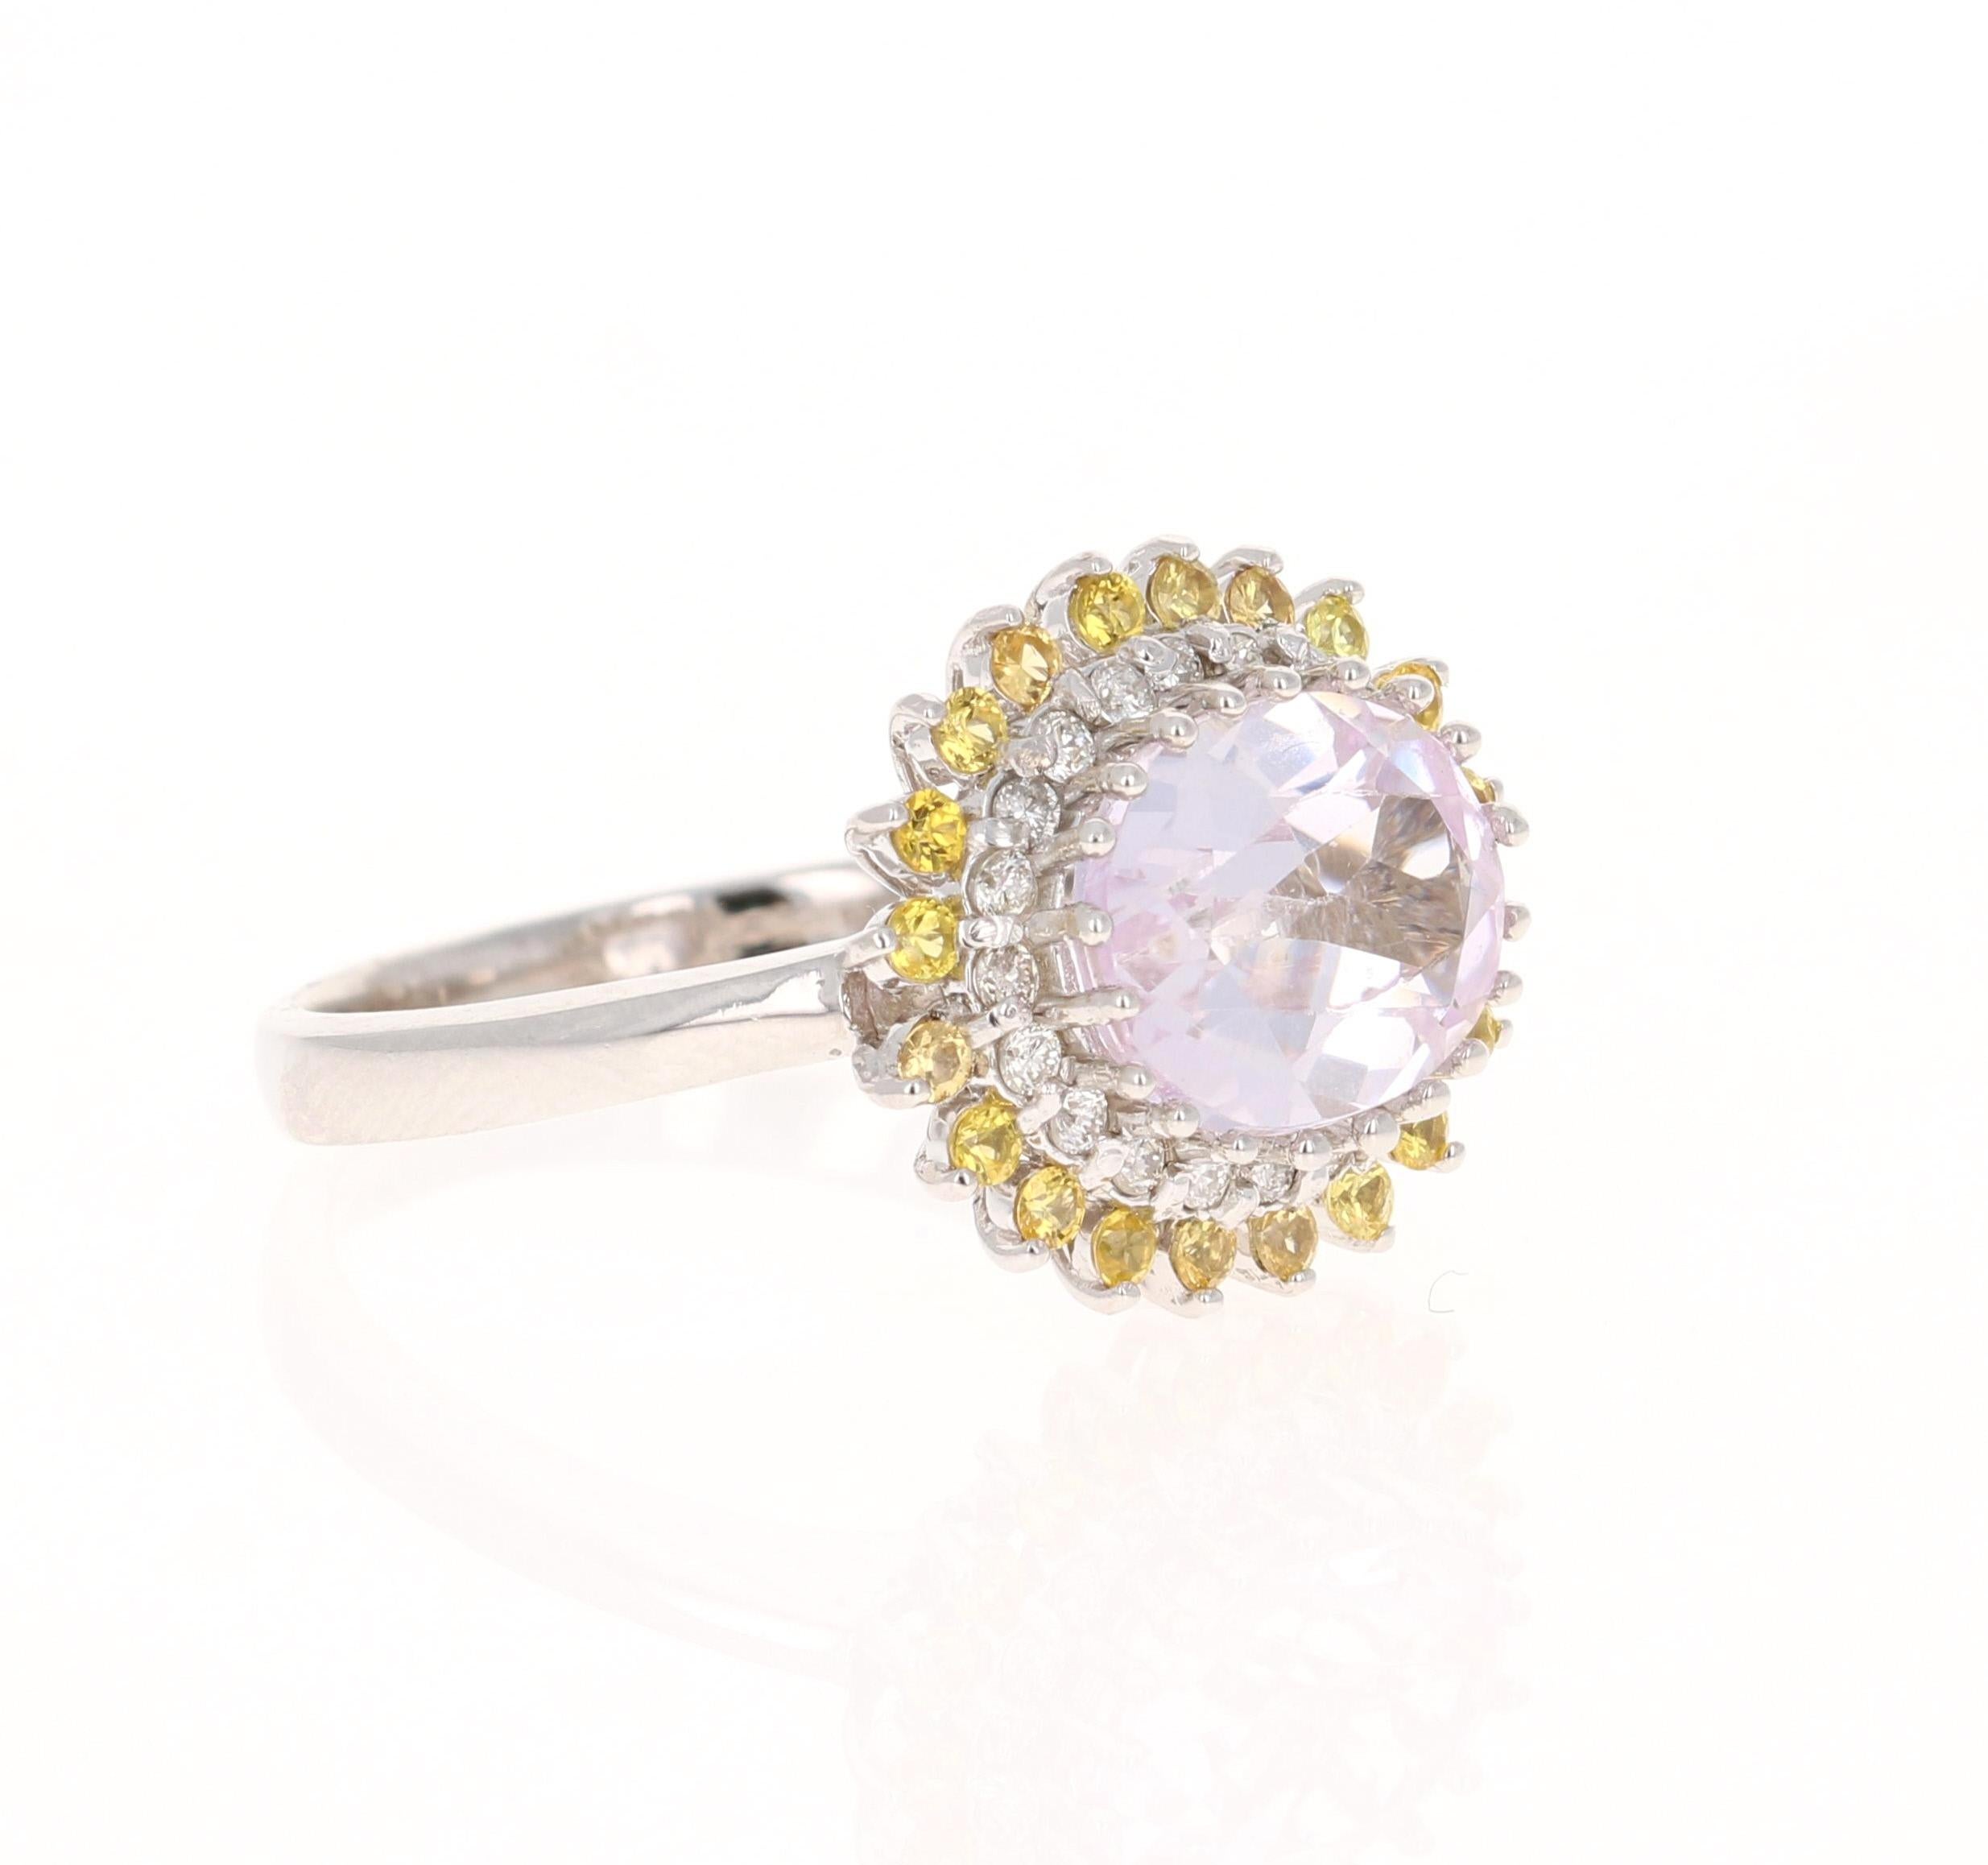 This ring has a Oval Cut Light Pink Kunzite that weighs 3.02 carats and measures at 8 mm x 10 mm. It is surrounded by 20 Yellow Sapphires that weigh 0.39 carats adn 20 Round Cut Diamonds that weigh 0.21 carats. (Clarity: VS, Color: H)

The ring is